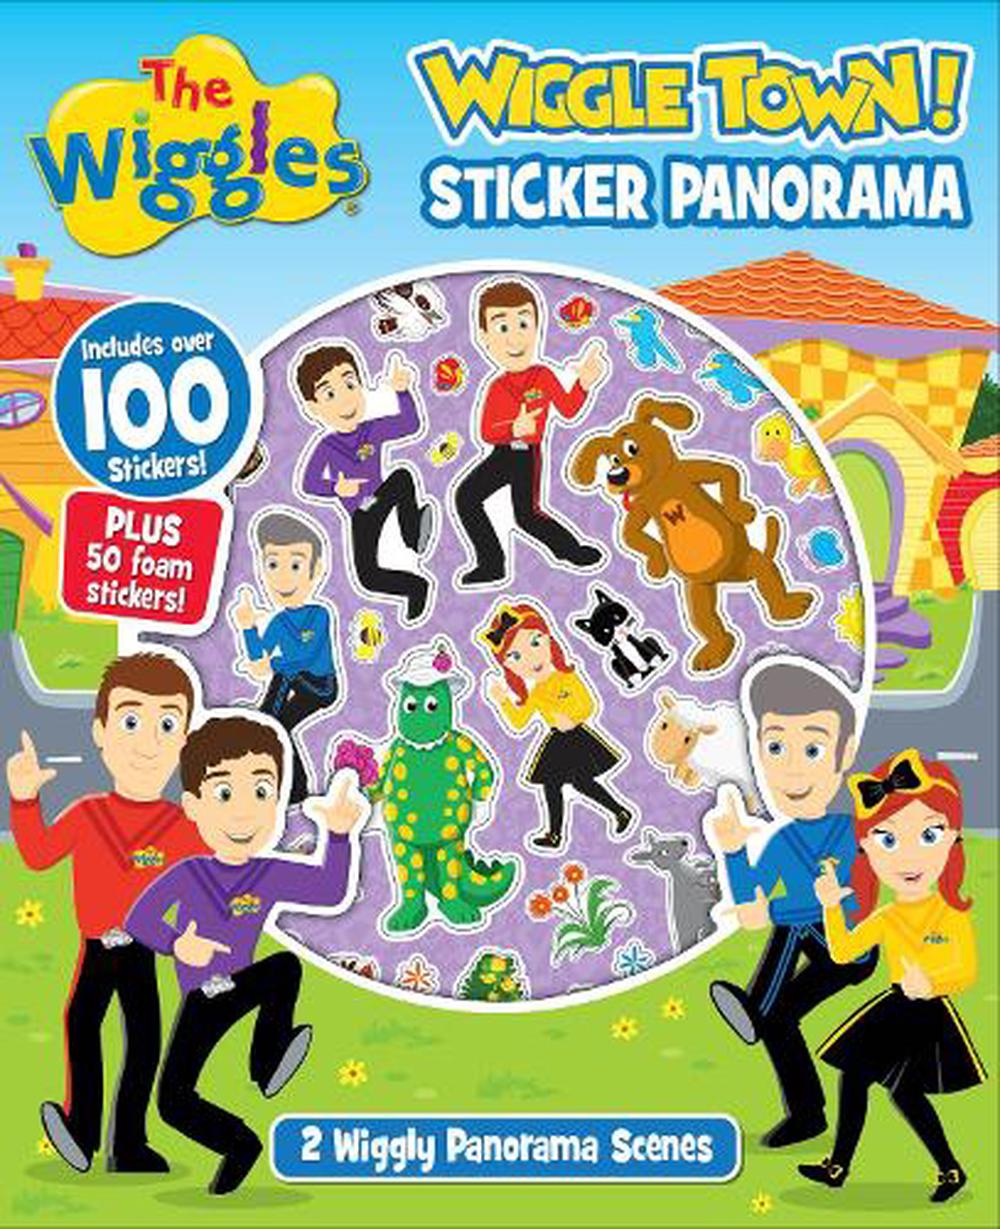 The Wiggles Wiggle Town Sticker Panorama By The Wiggles - the roblox wiggles big ballet day 2 the roblox wiggles